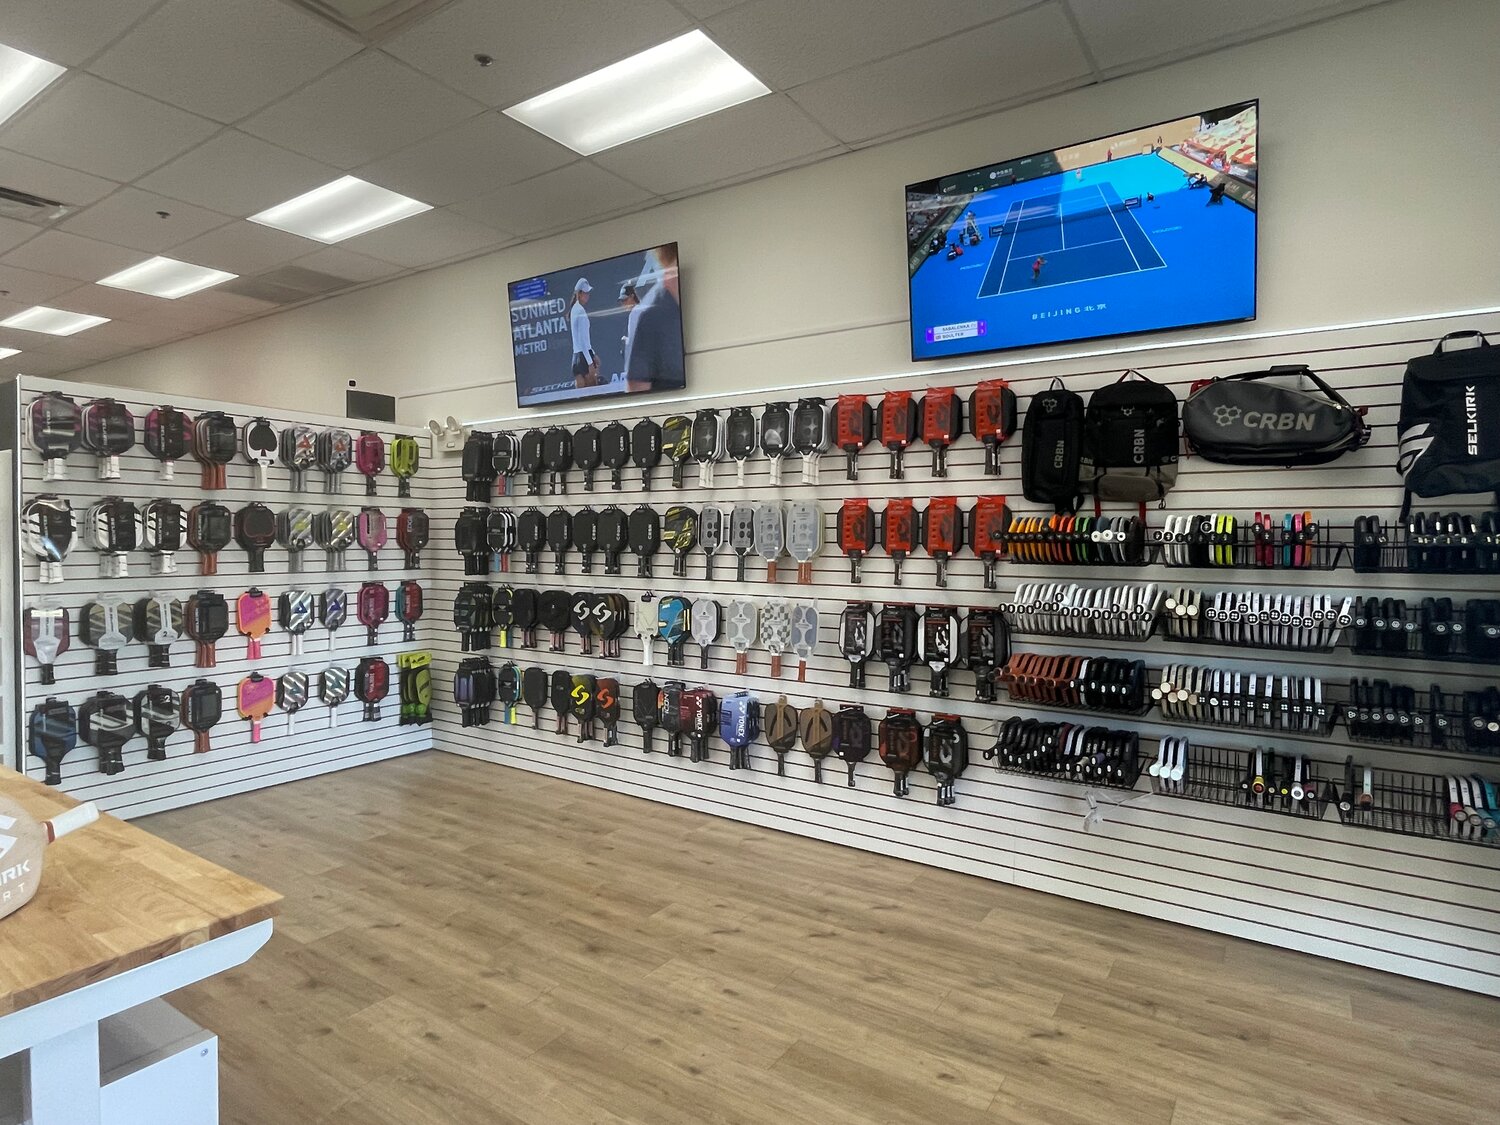 All About Tennis & Pickleball is a specialty retail store that has opened in Gilbert.